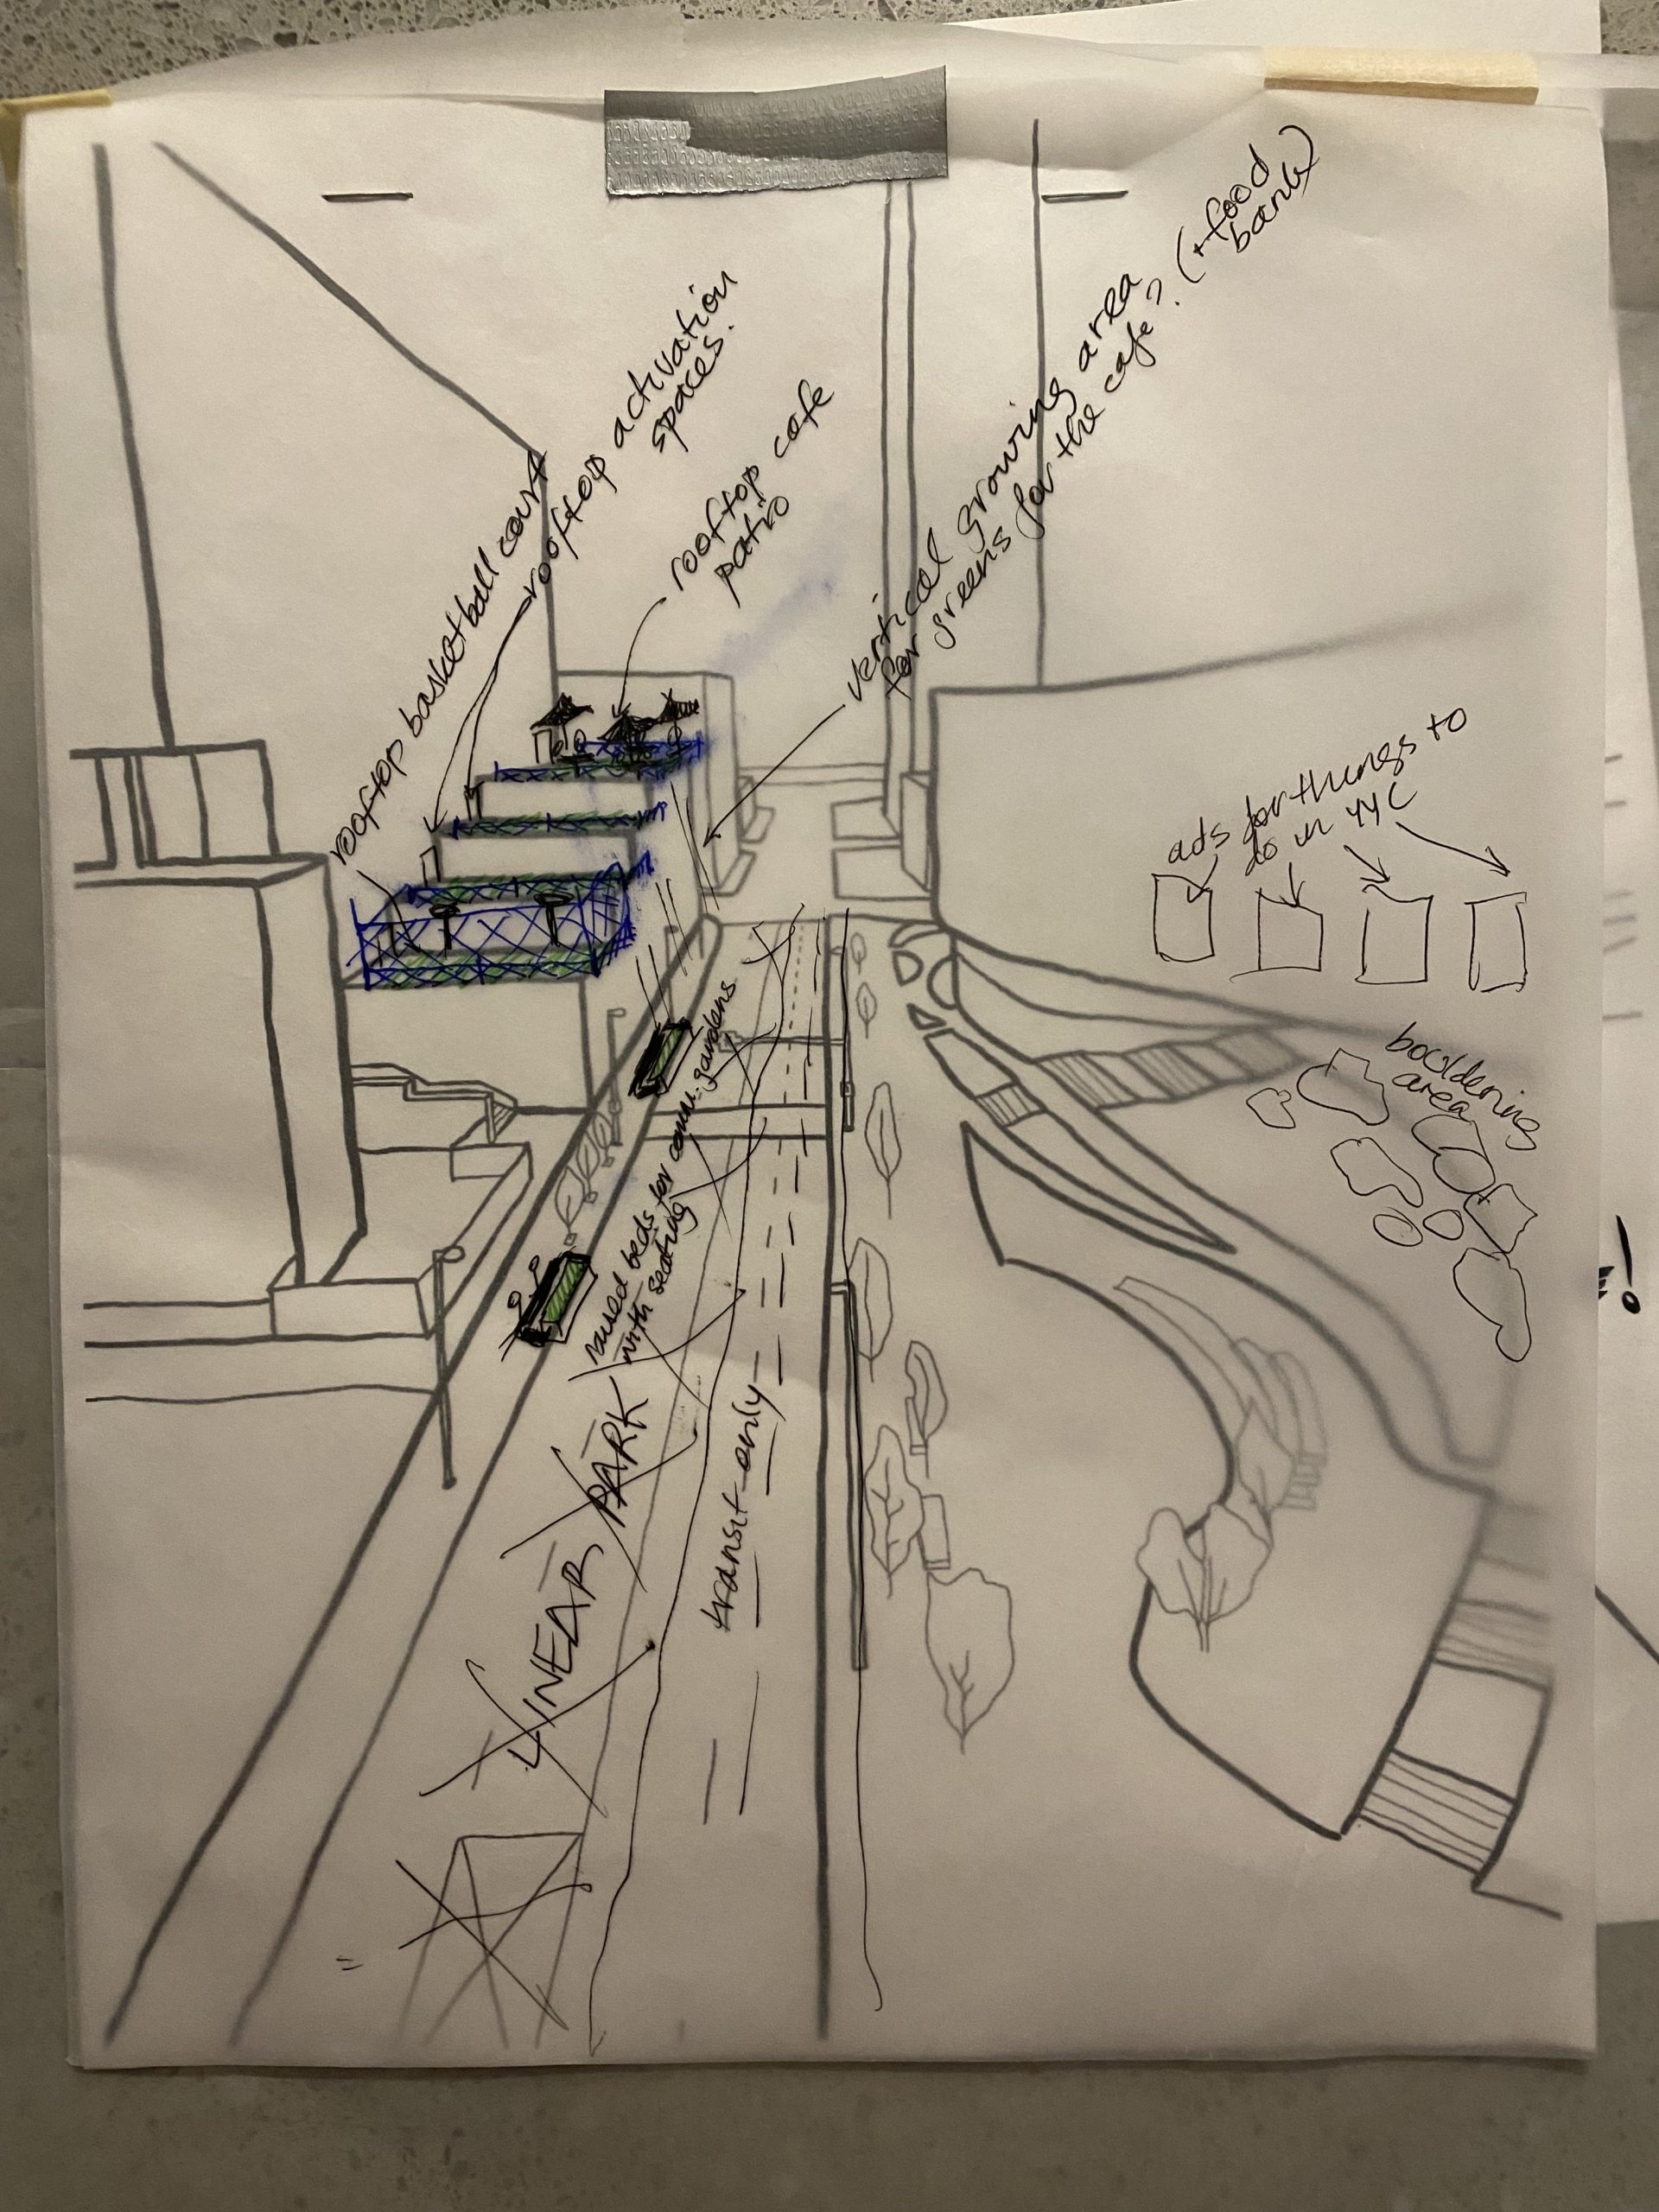 A piece of paper showing a mock blueprint of a reimagined neighborhood, showing what Sketch Mob is trying to accomplish.